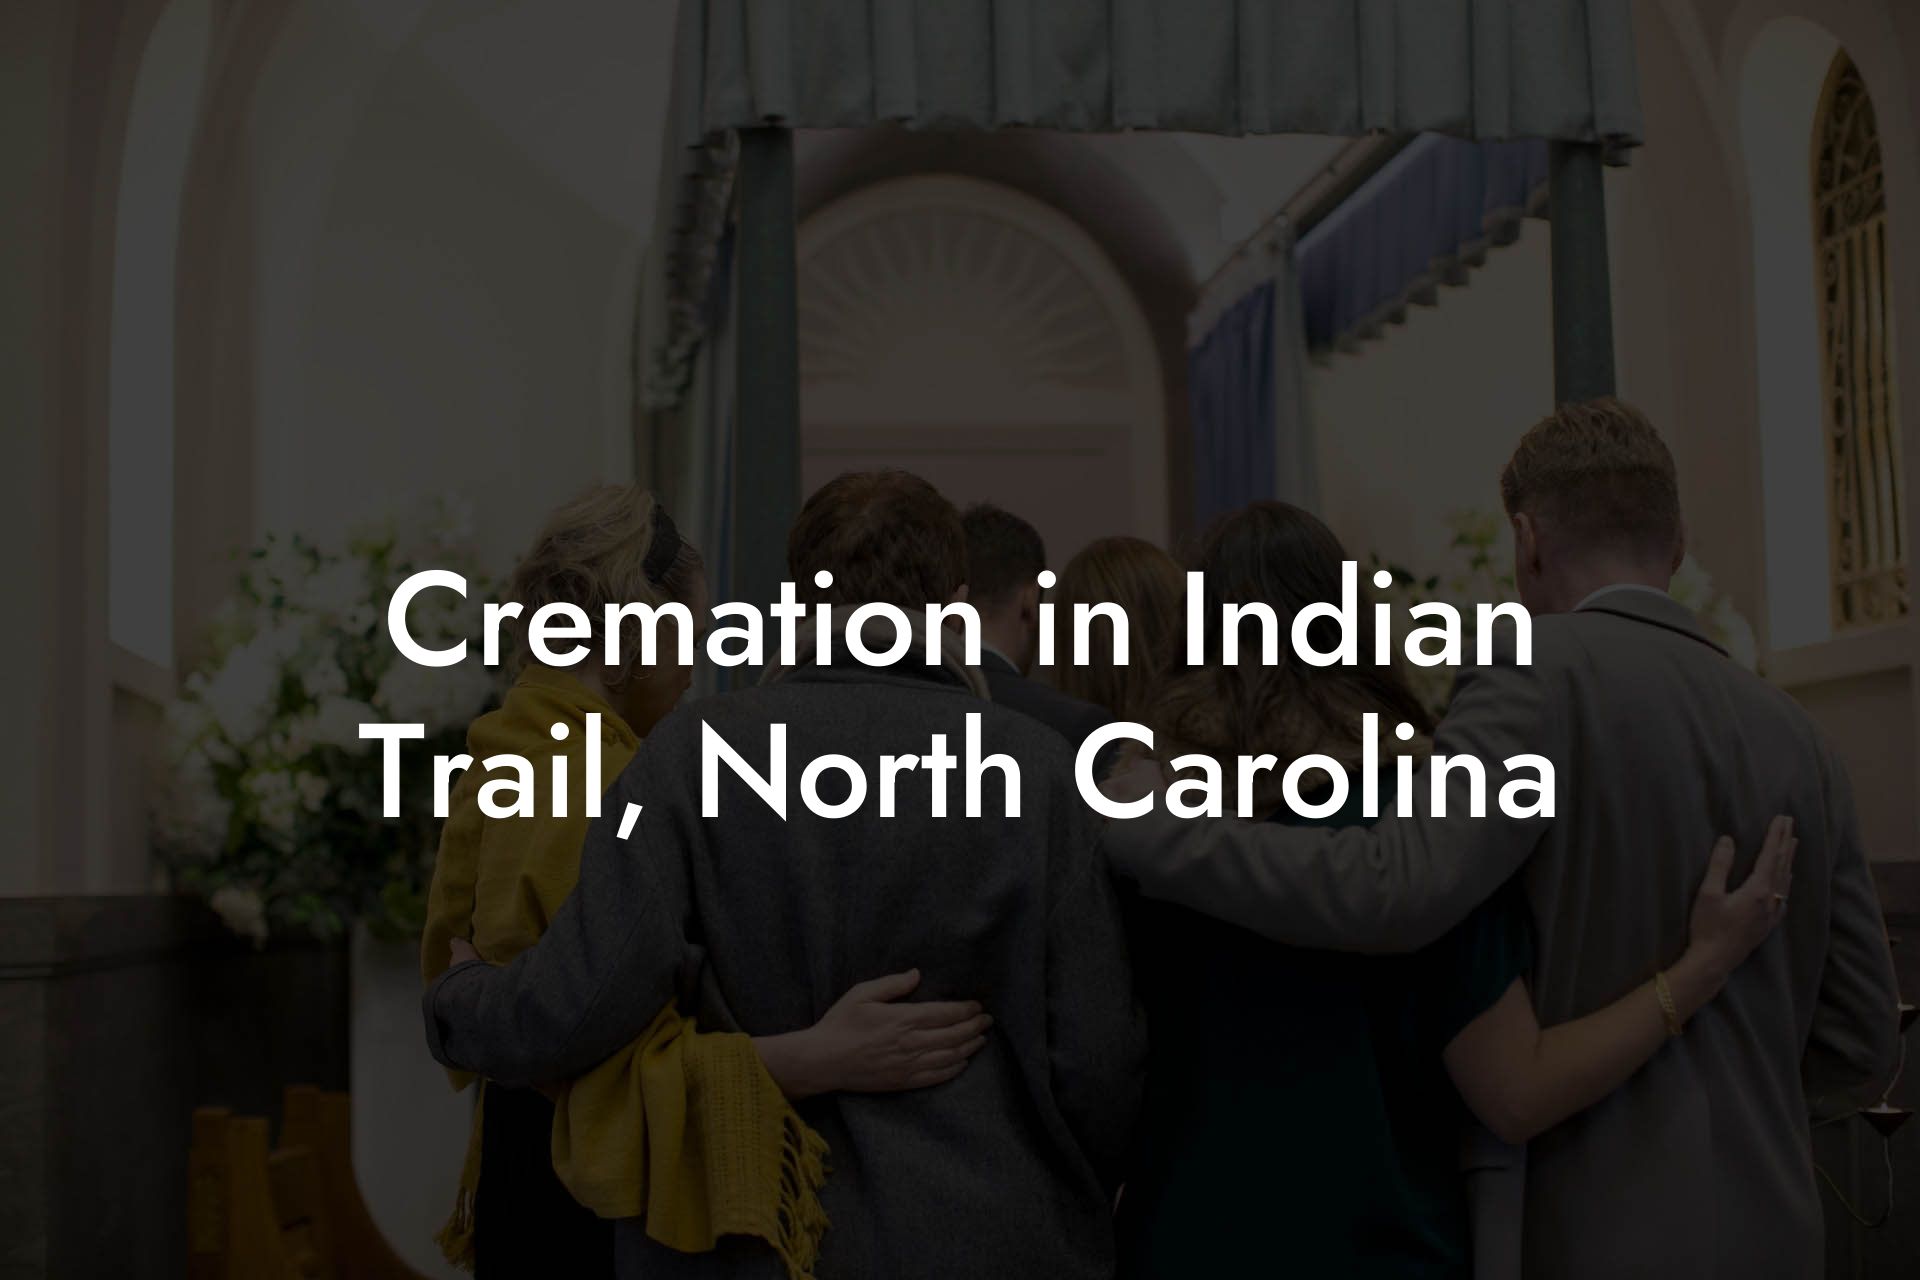 Cremation in Indian Trail, North Carolina